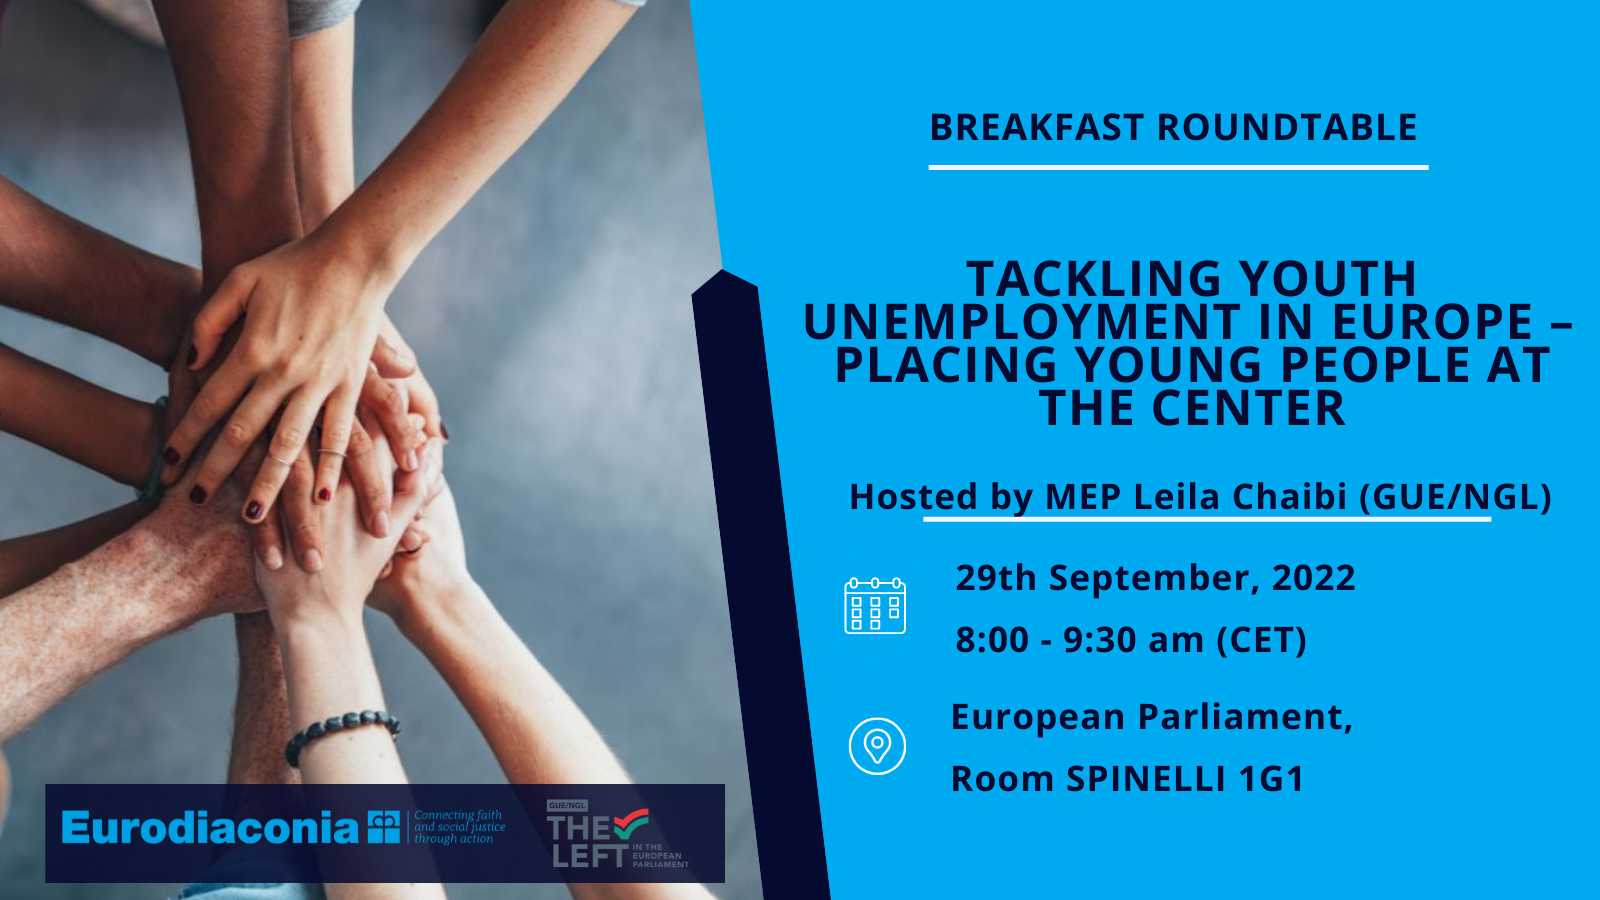 Breakfast Roundtable: Tackling youth unemployment in Europe